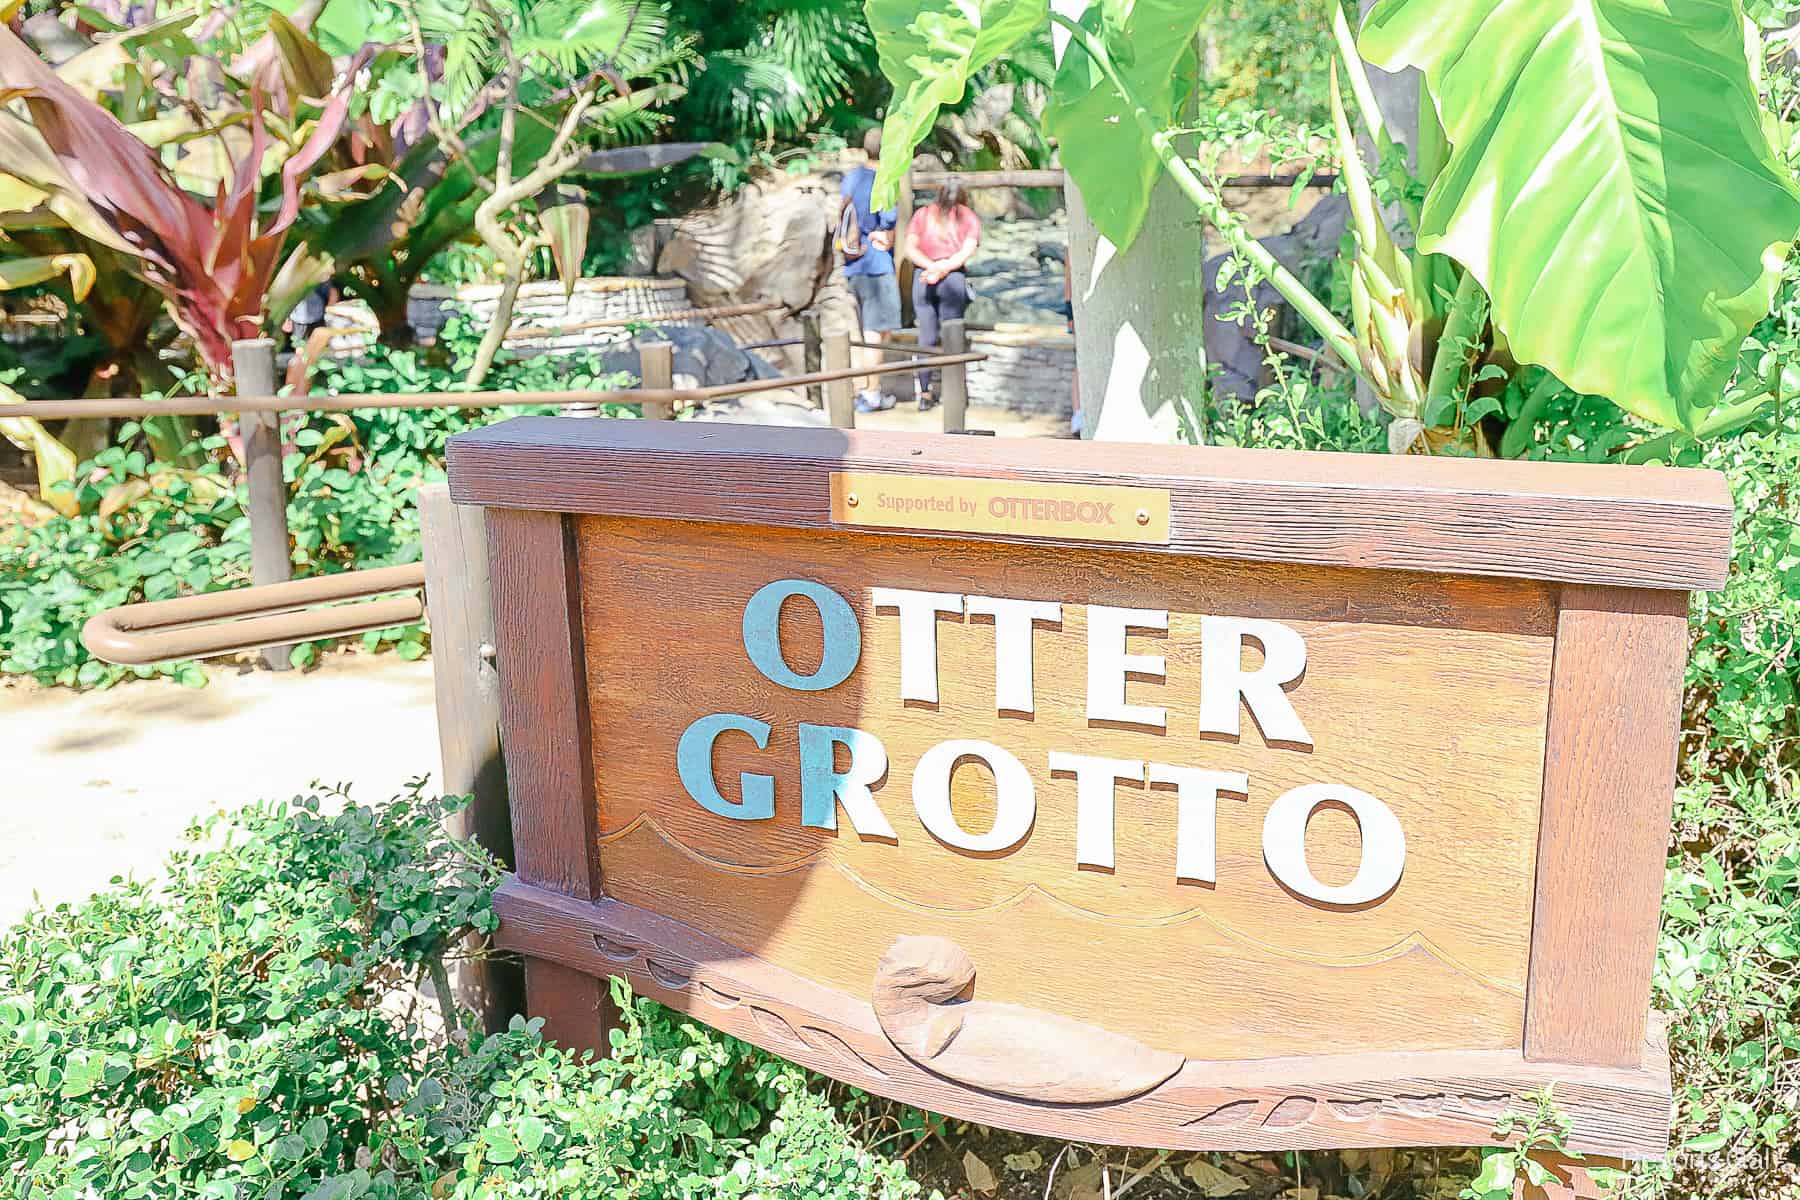 Otter Grotto signage at the base of the Tree of Life 